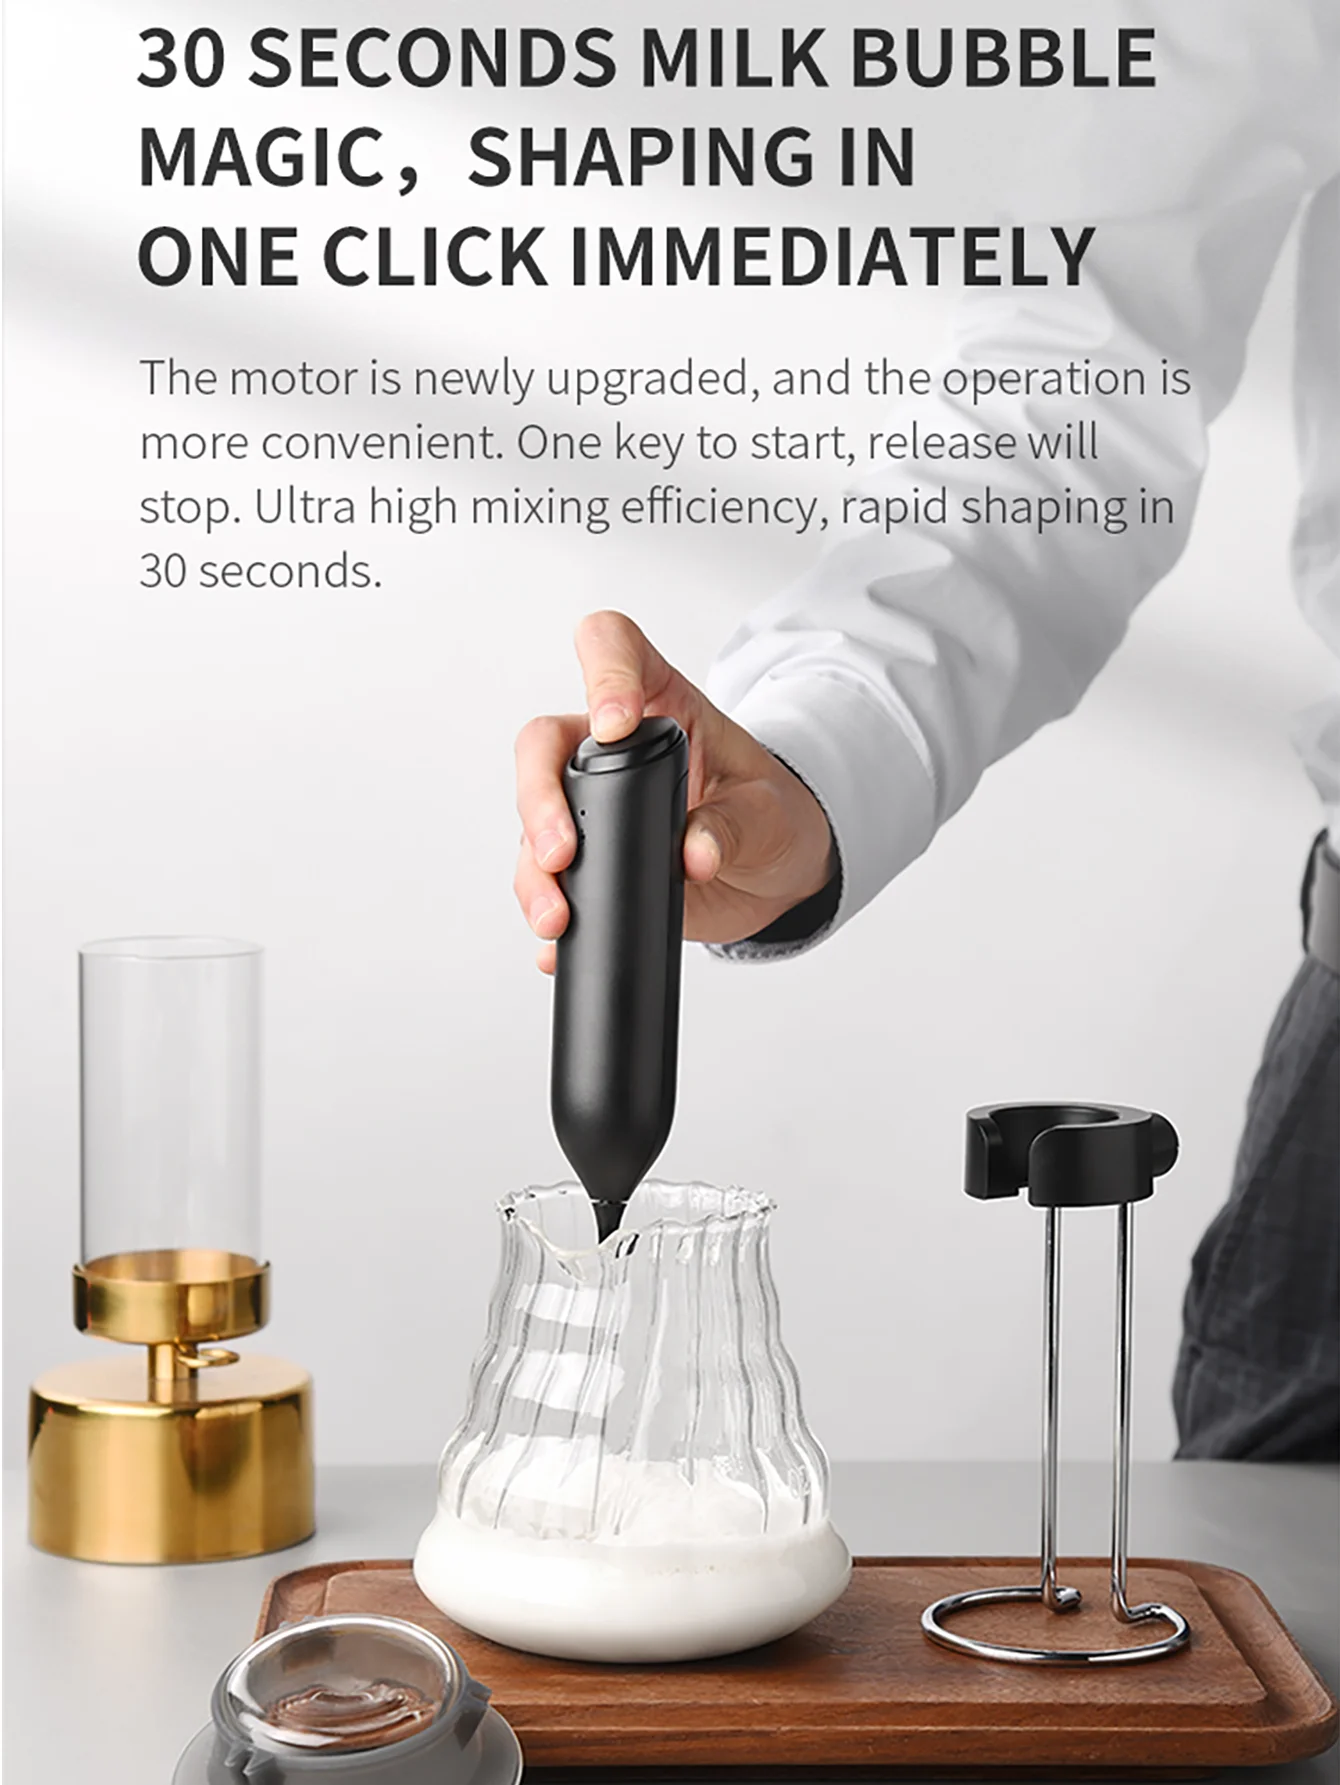 https://ae01.alicdn.com/kf/Sd1356caeb54e4f868deb0e283960ddf8F/1-PCS-USB-Rechargeable-Handheld-Egg-Beater-Electric-Milk-Frother-Foam-Maker-Mixer-Coffee-Drink-Frothing.png